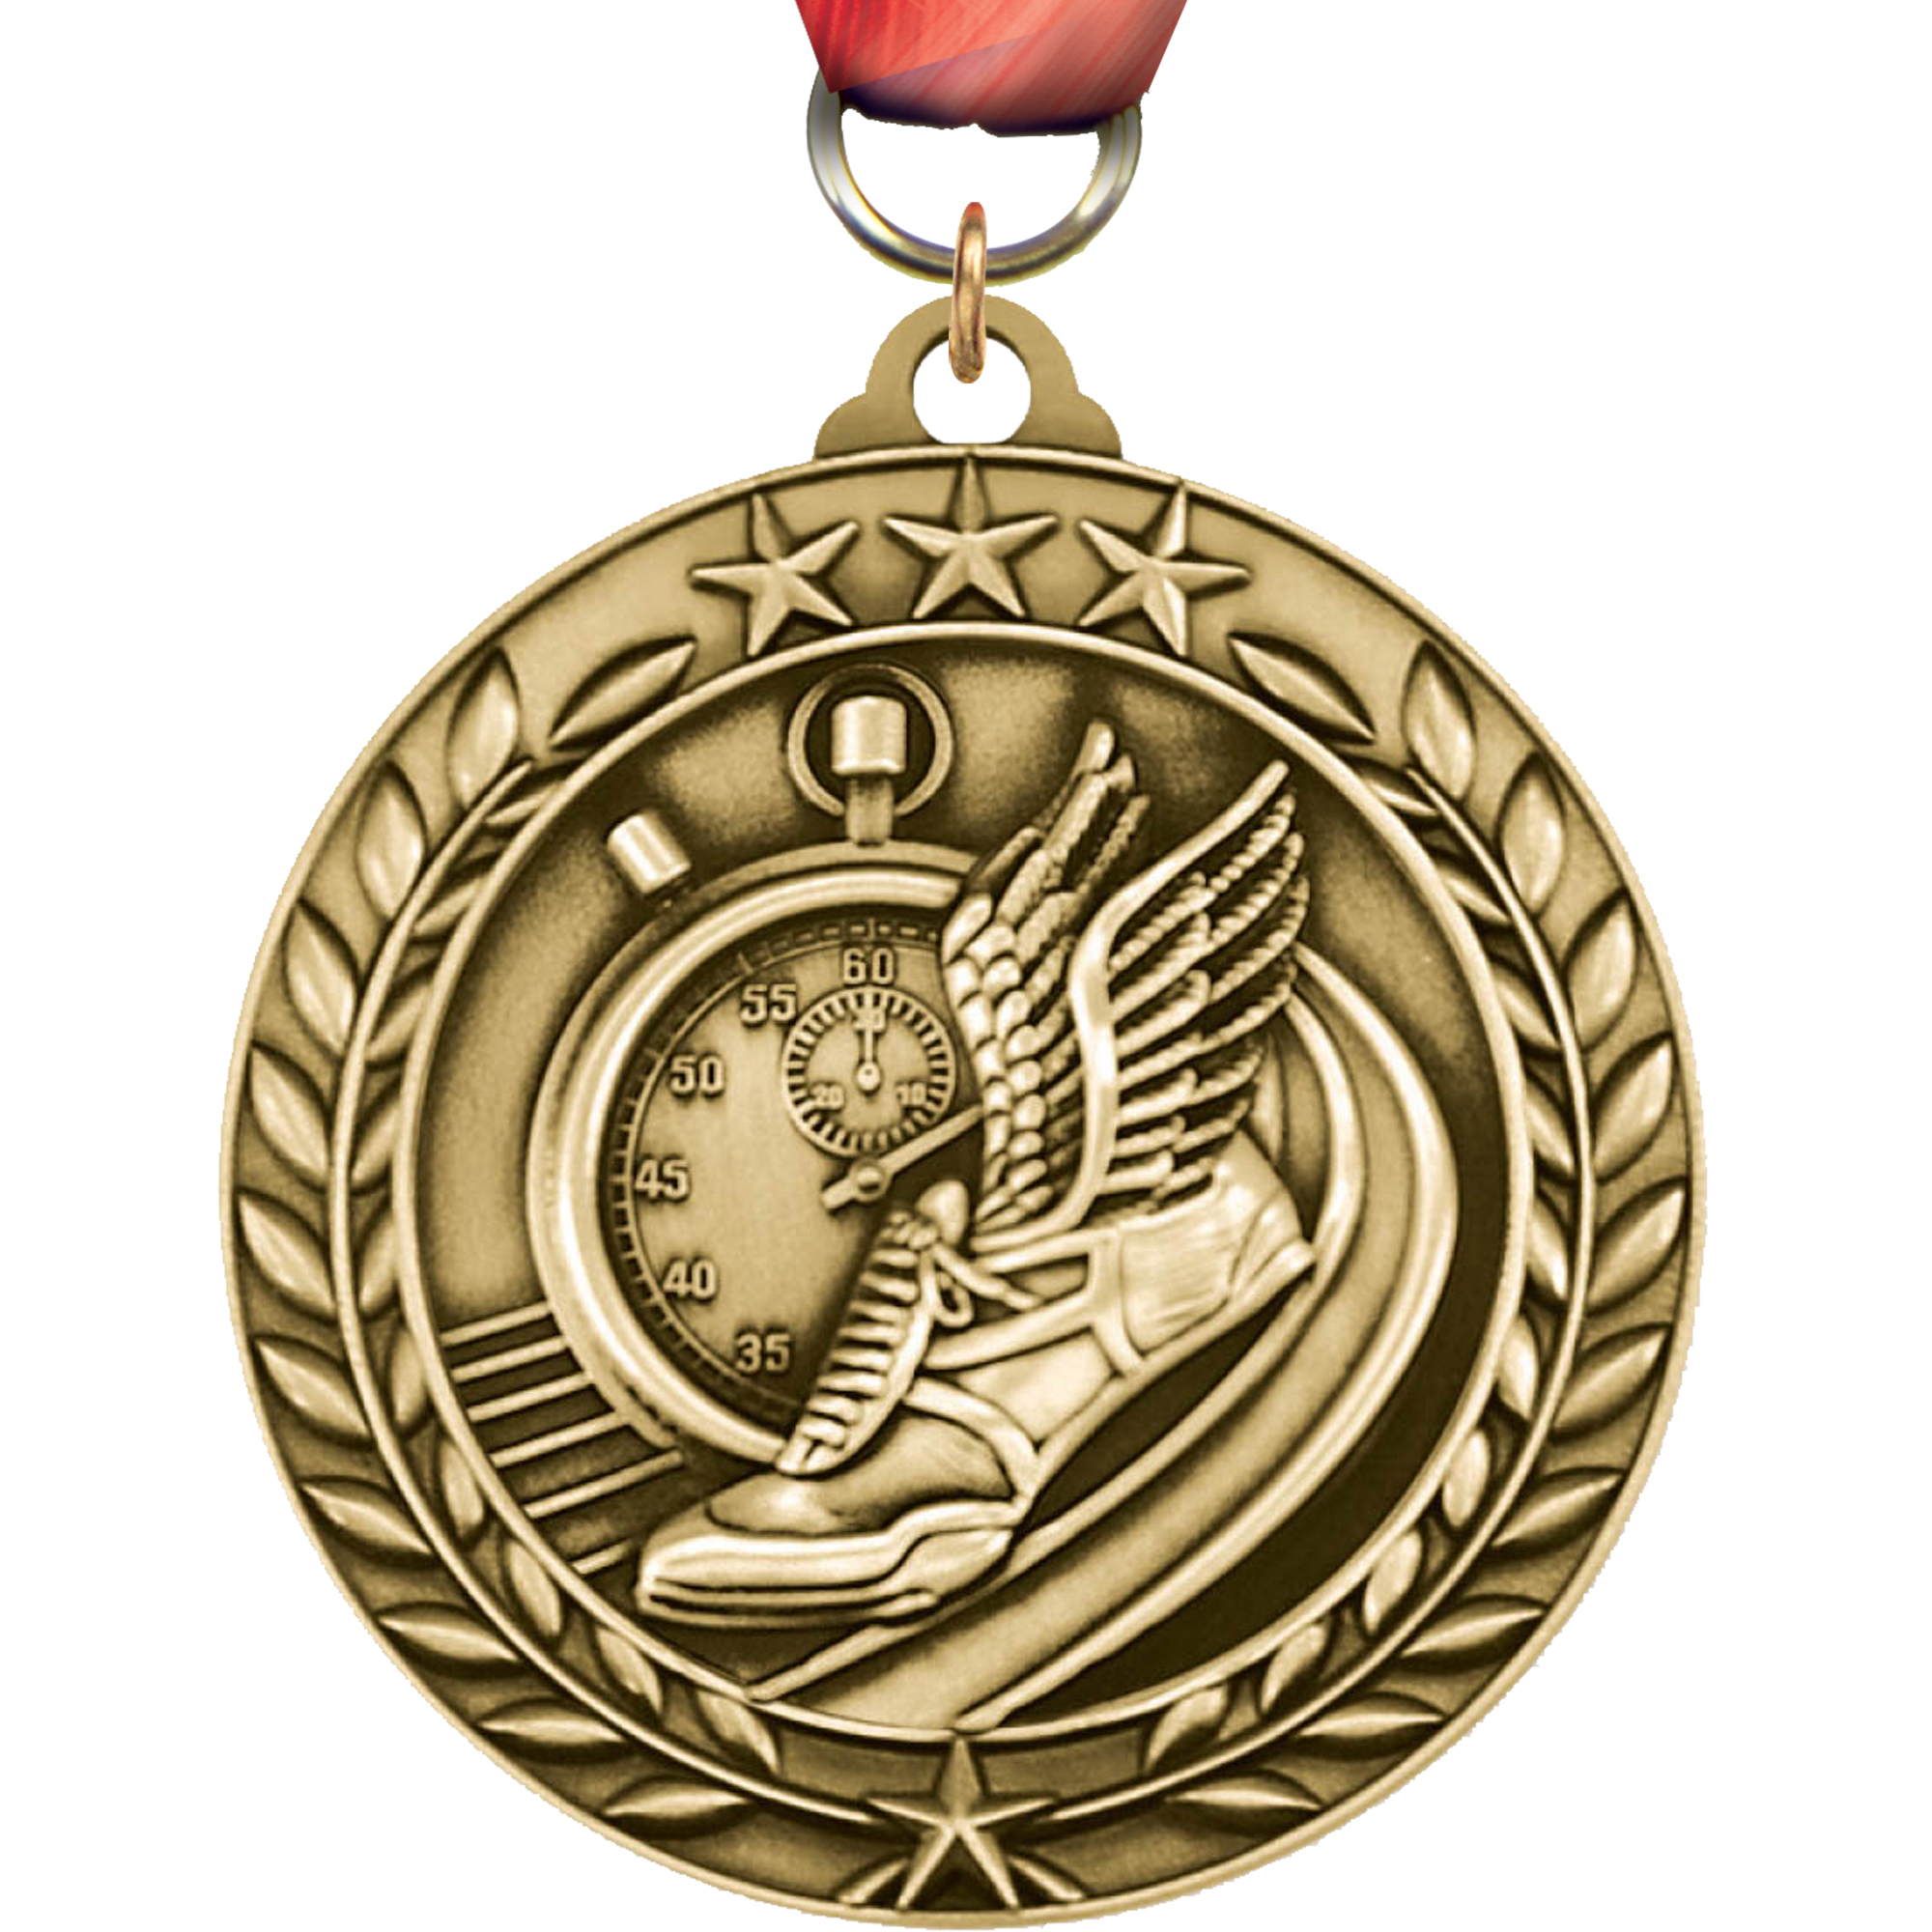 Track 1.75 inch Dimensional Medal